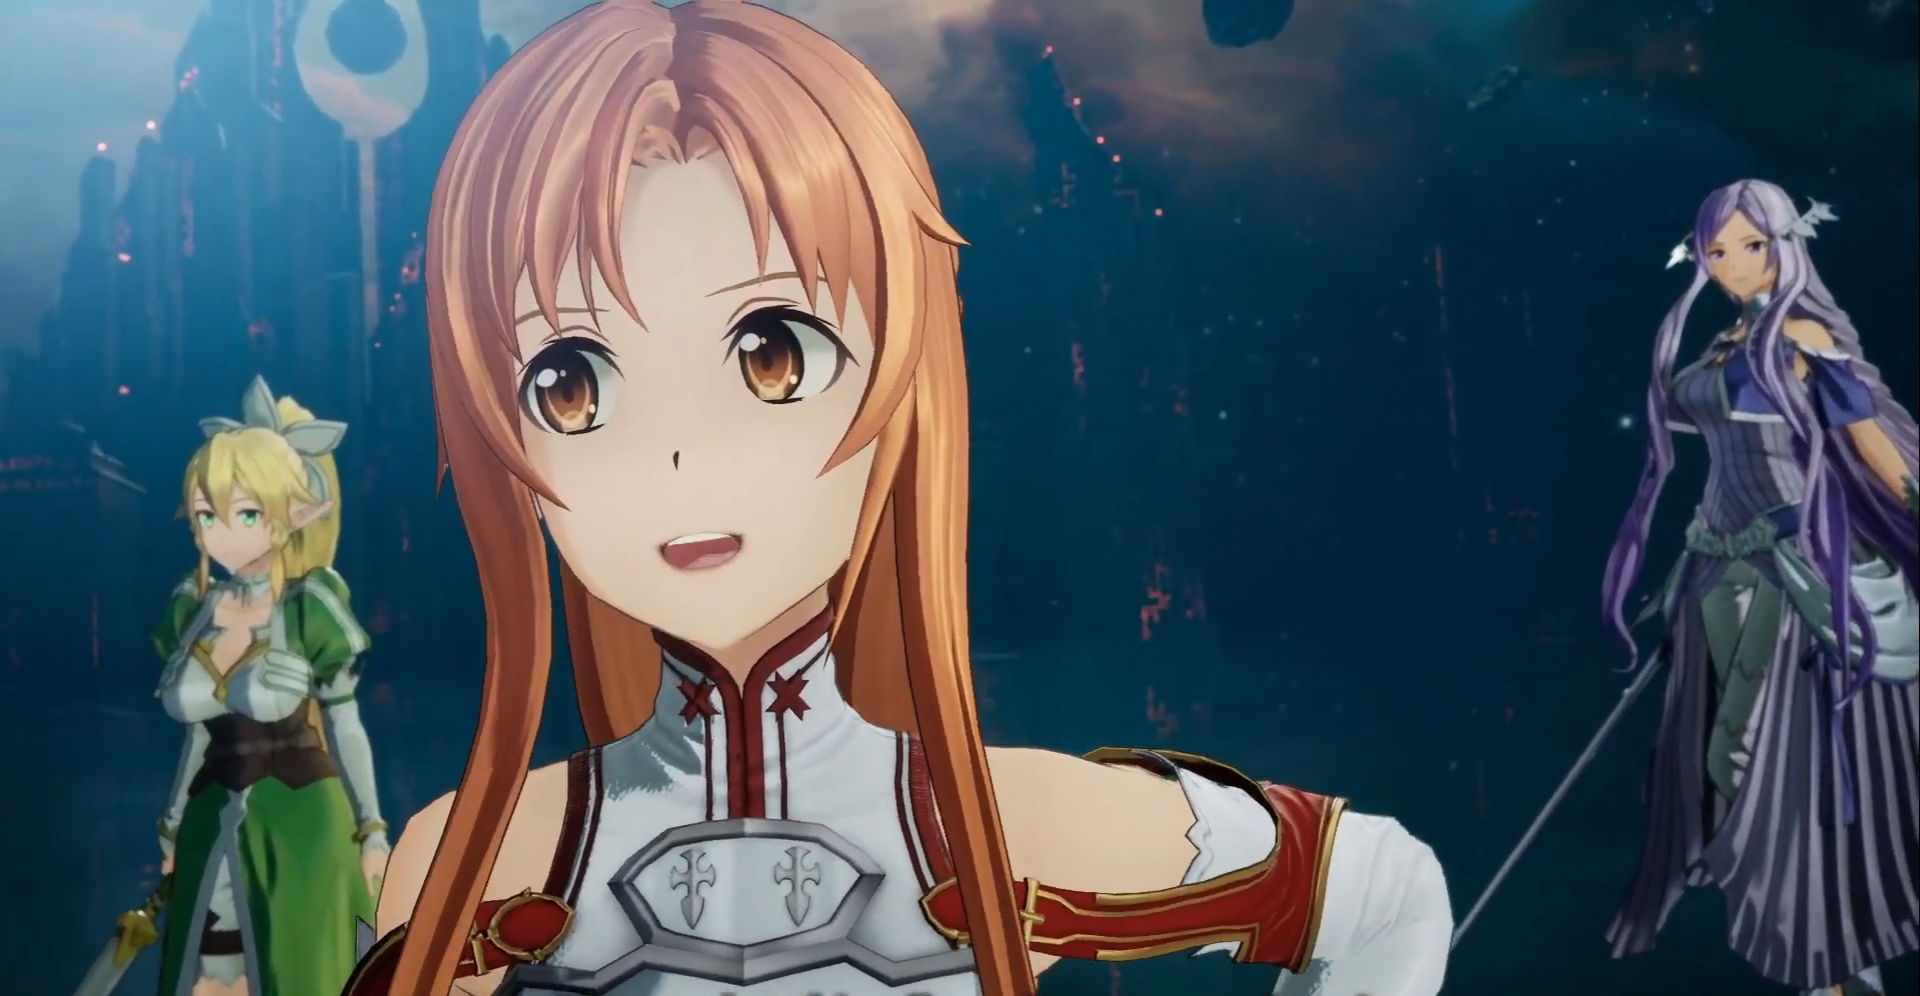 Sword Art Online: Fractured Daydream Details Online Modes, Character Roles, Combat Mechanics, and Crossplay; 30 Minutes of Gameplay